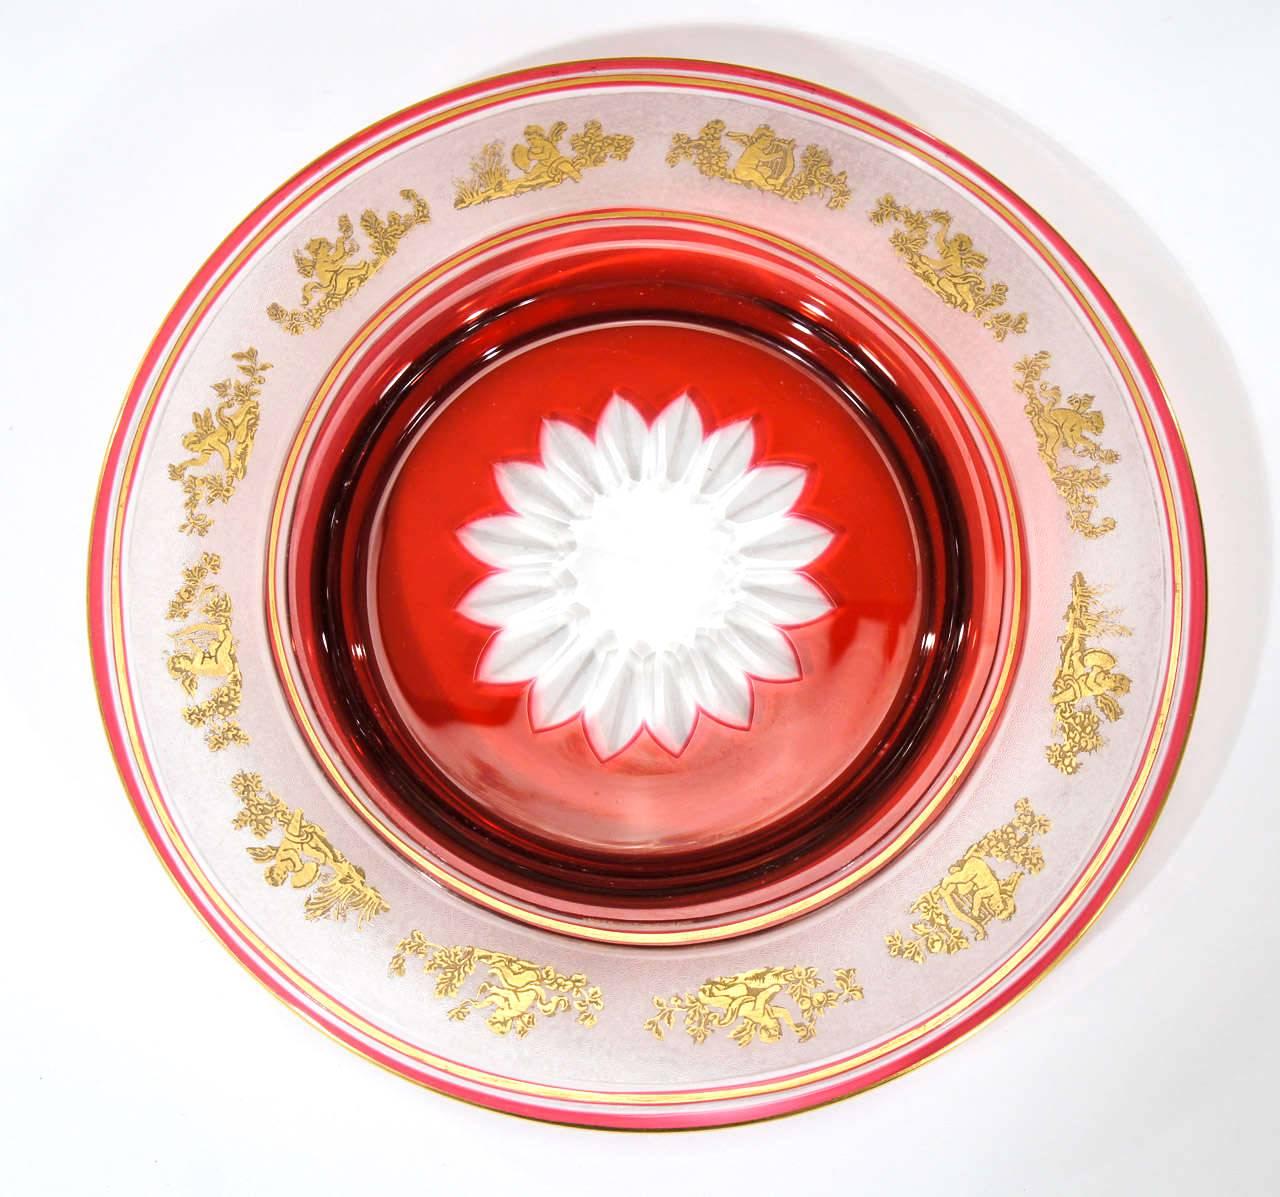 A rare and amazing set of 12 gorgeous dessert plates with cranberry overlay, cut to clear with central star cut medallion and cameo cut frieze of Roman putti and angels embellished with gold leaf. This pattern is one of Val St. Lambert's finest and